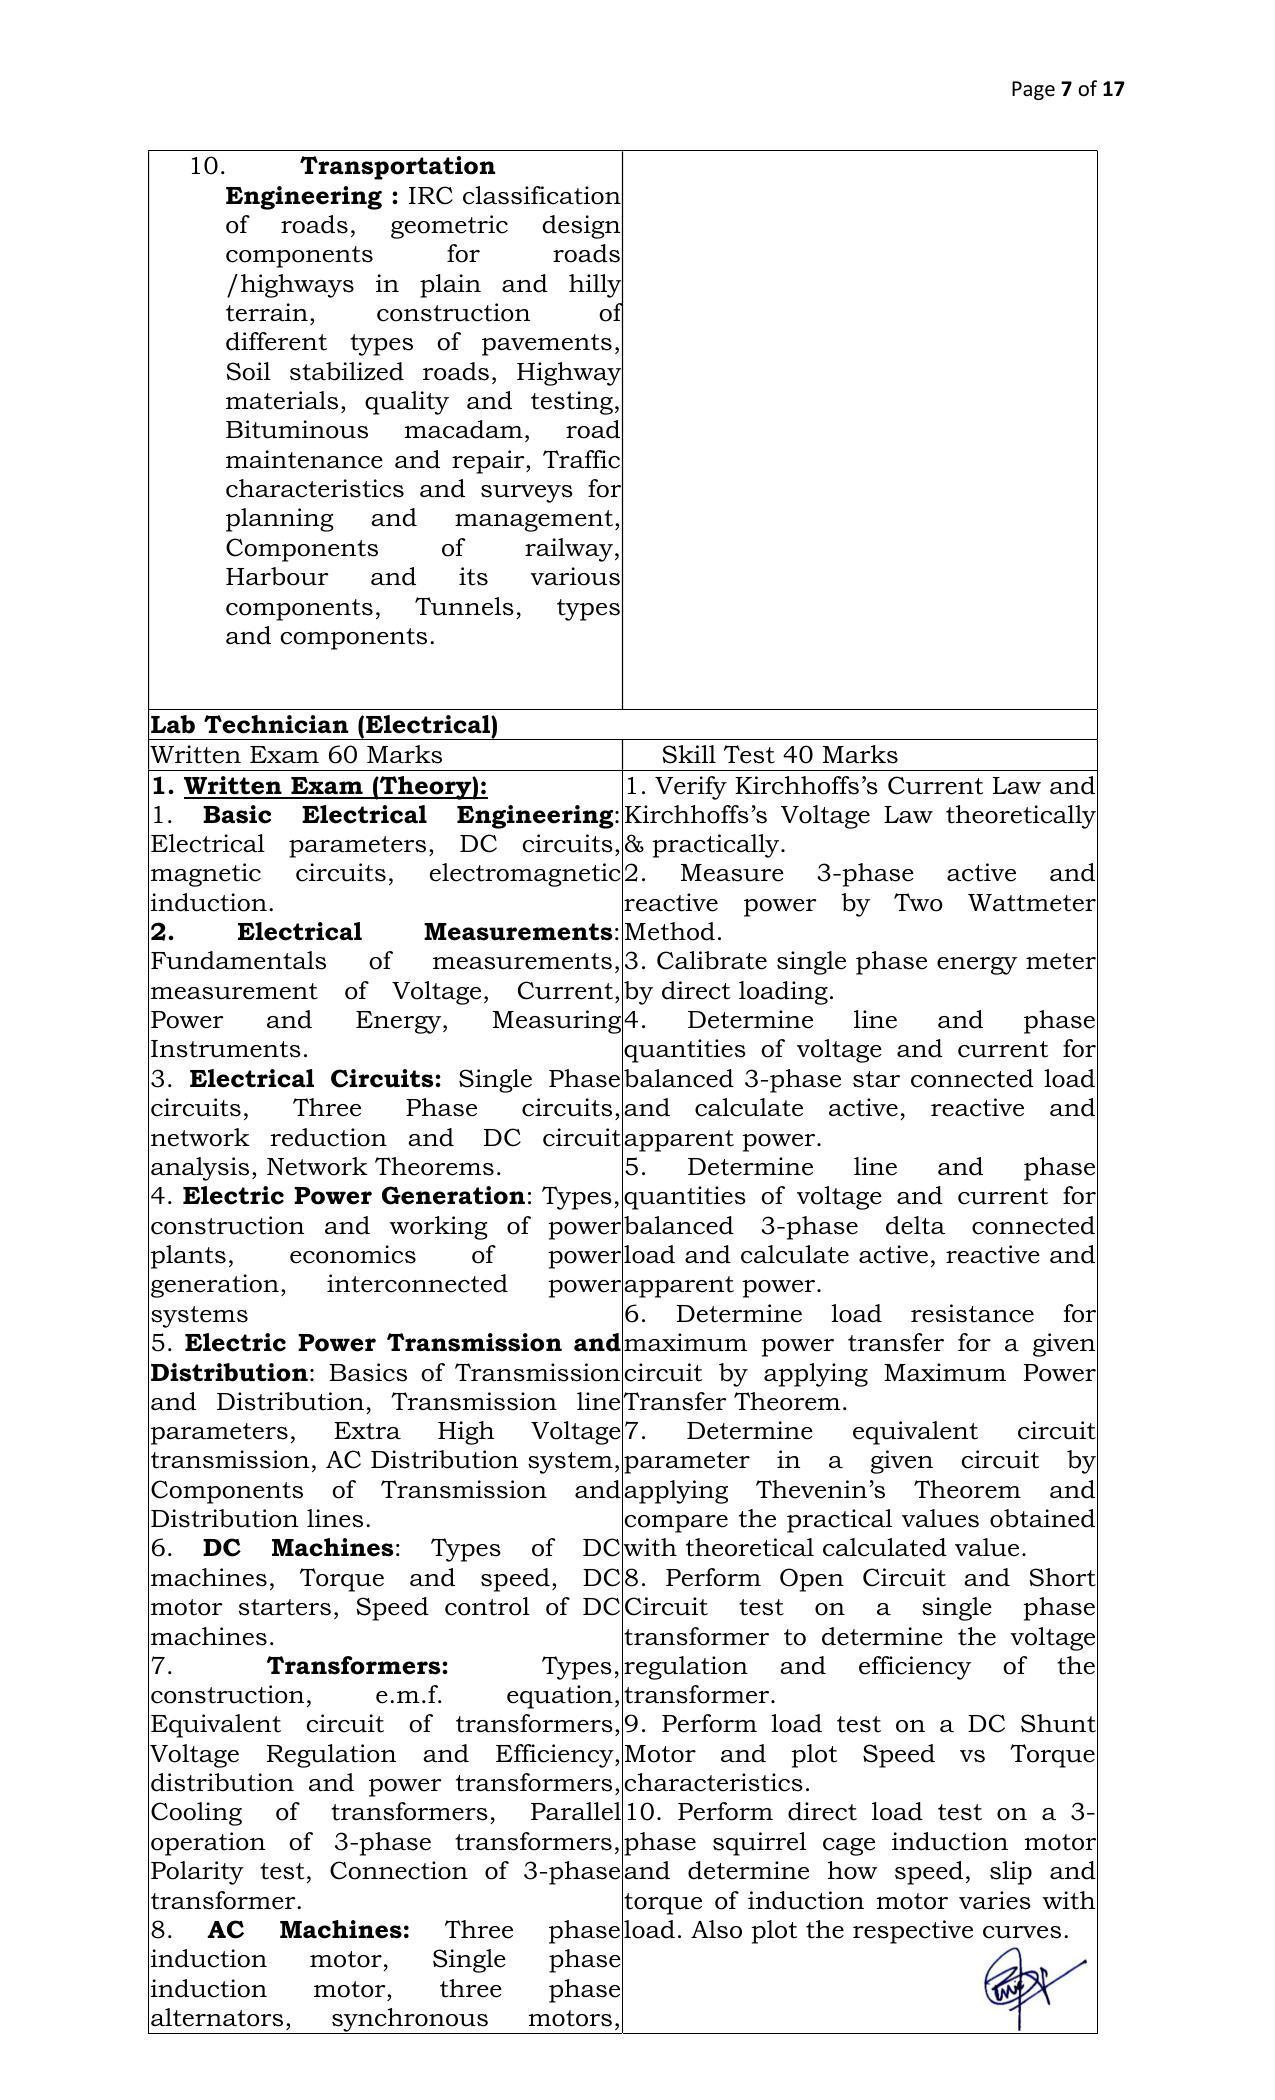 DBRAIT Invites Application for Lab Technician, Instructor Recruitment 2022 - Page 12